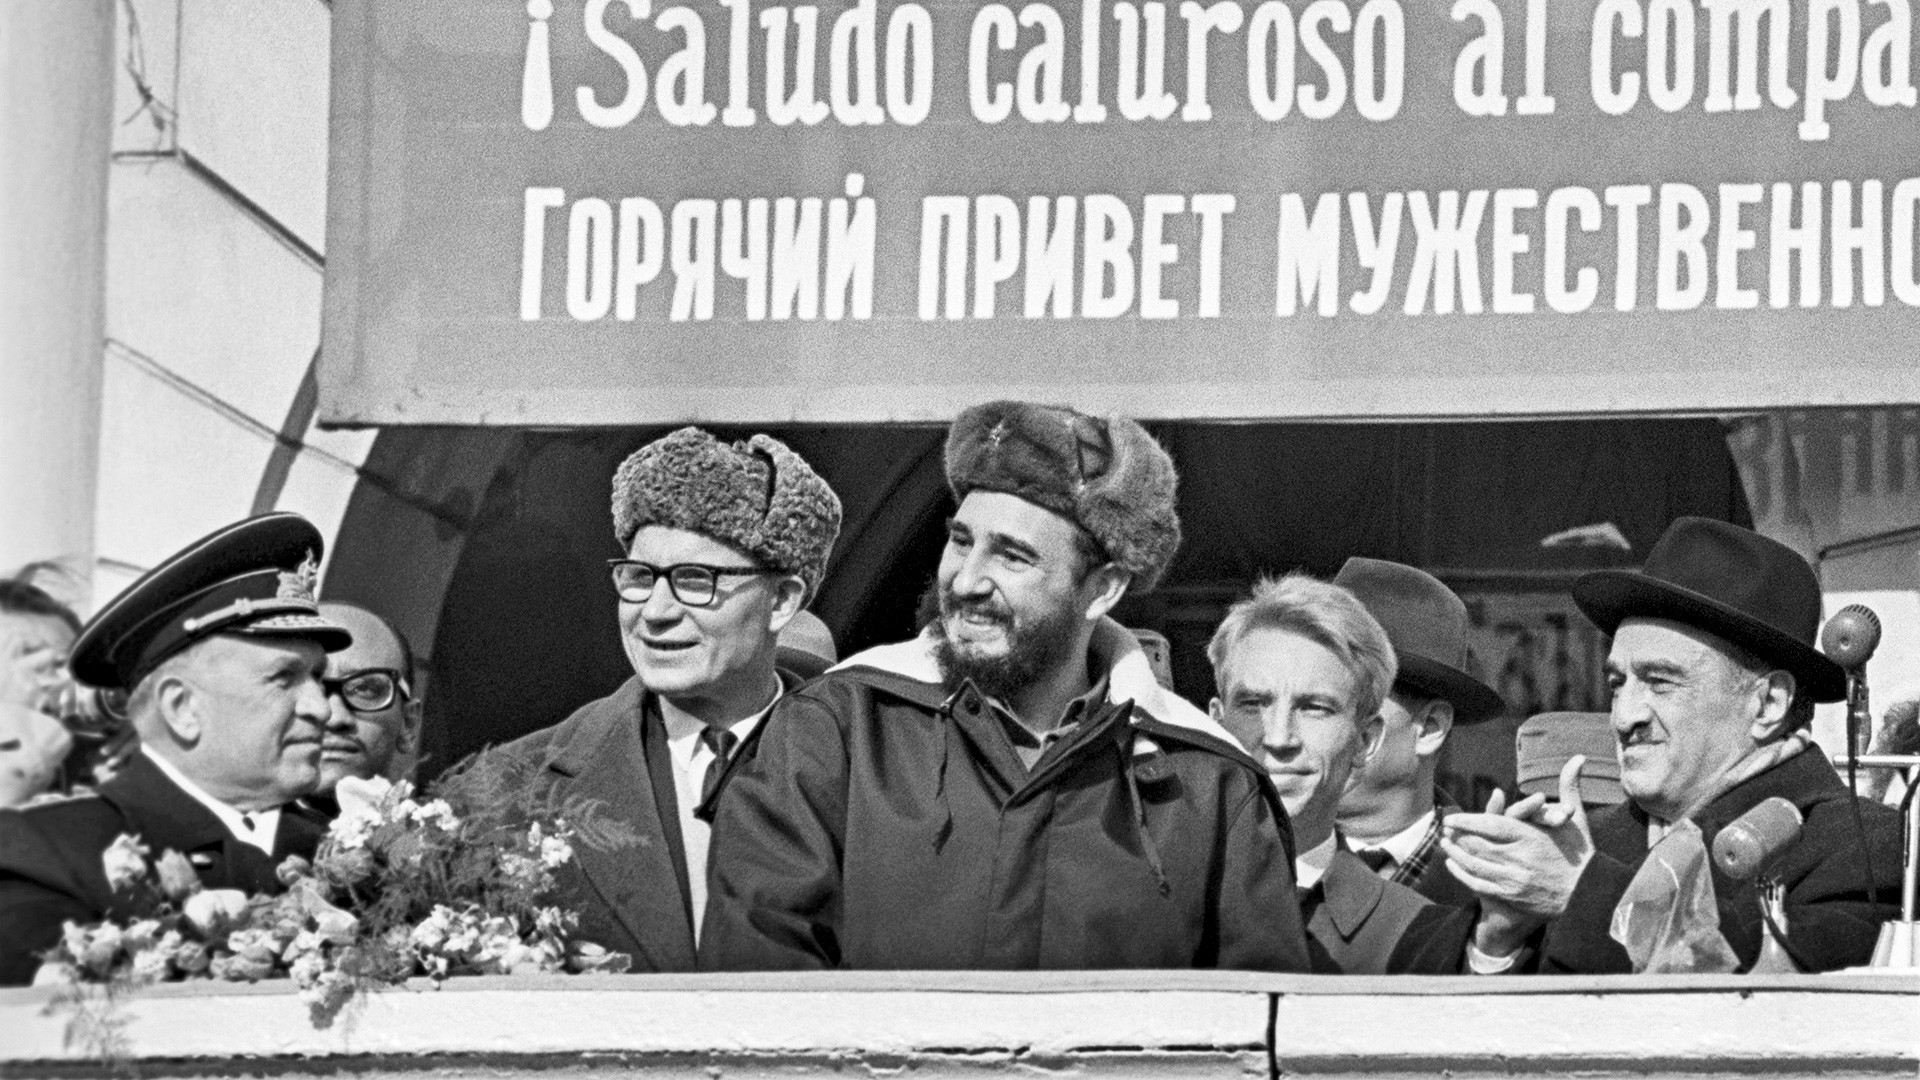 Fidel Castro's visit to the USSR, Murmansk, 1963